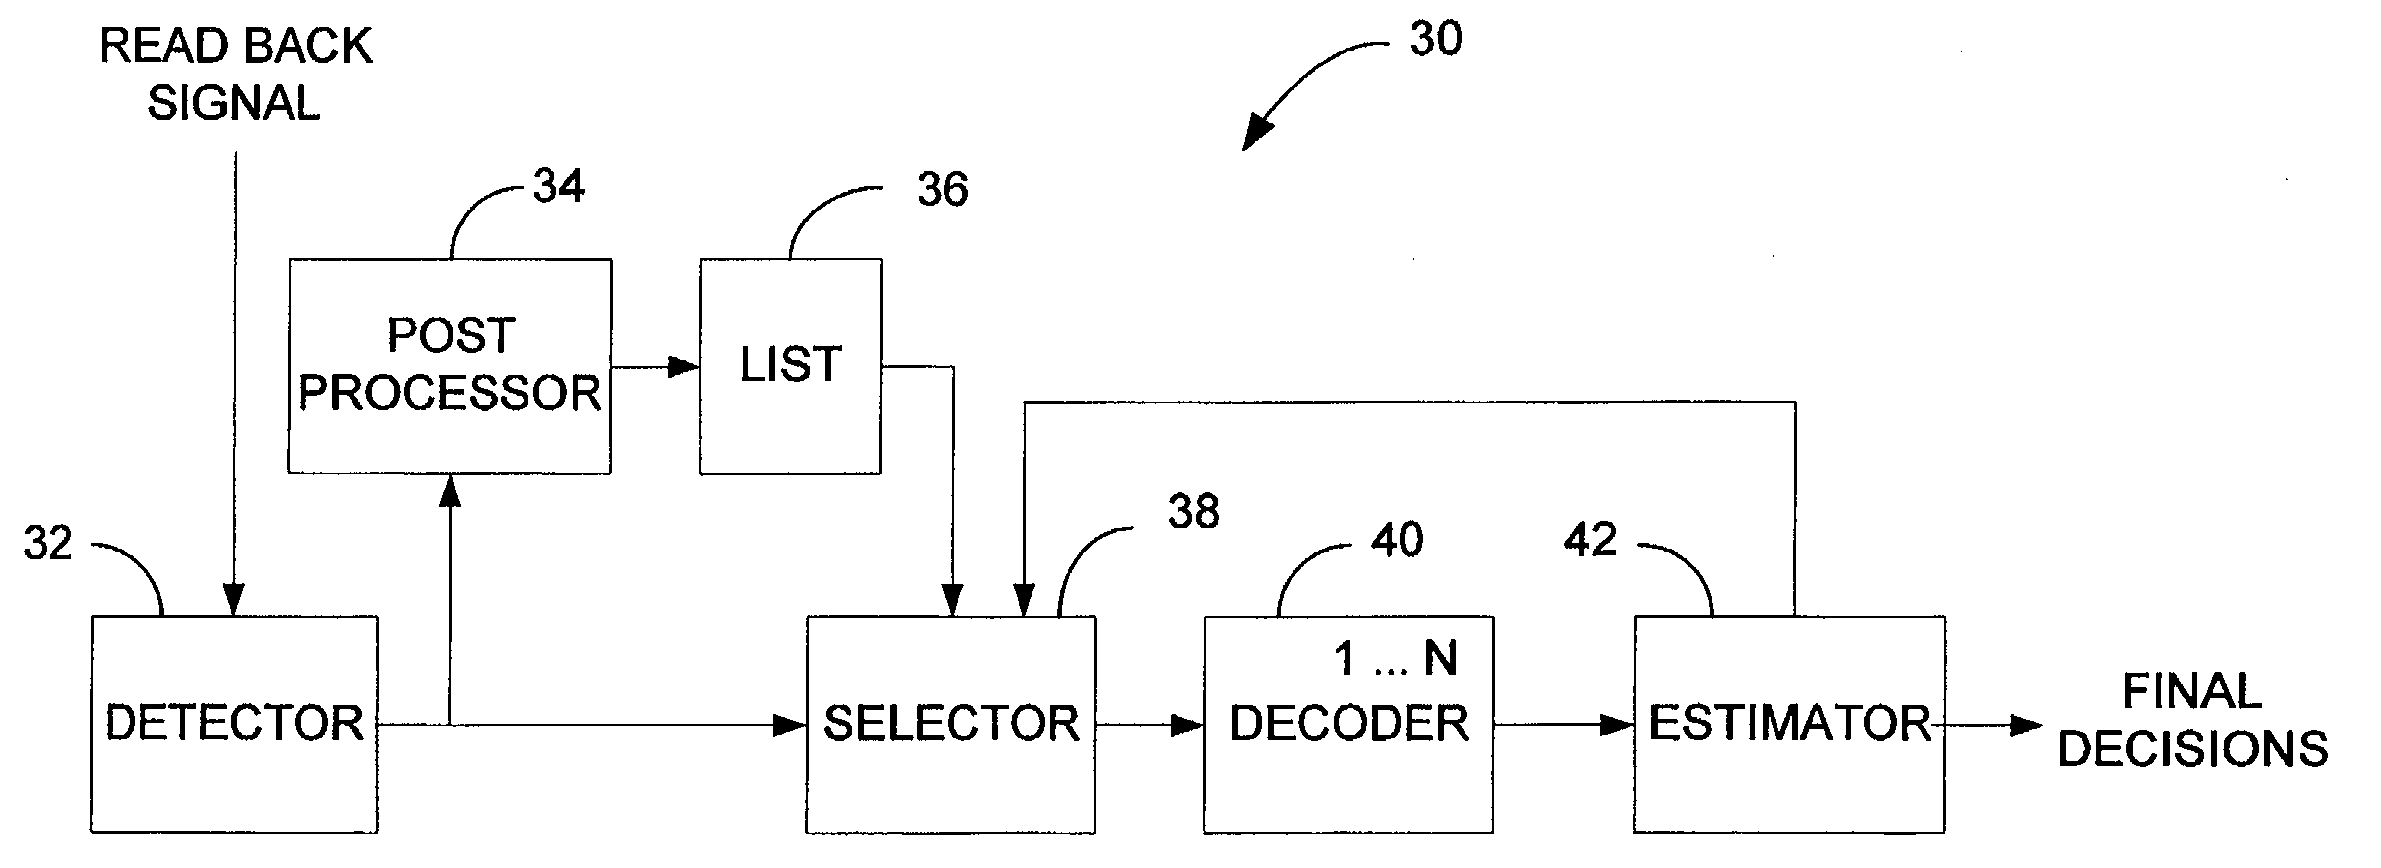 Correcting errors in disk drive read back signals by iterating with the Reed-Solomon decoder